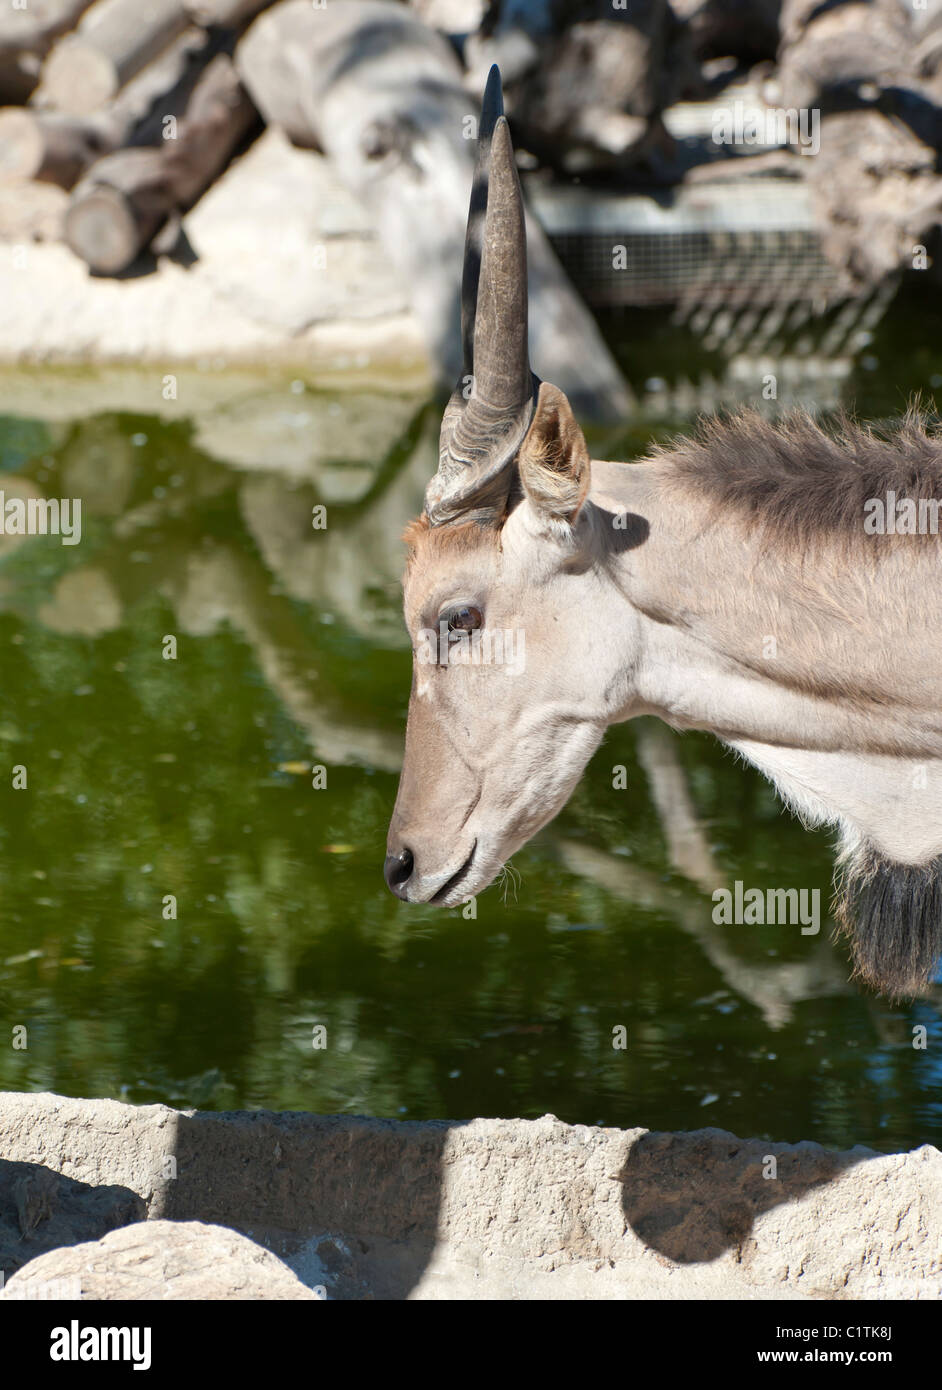 African Eland at a watering hole Stock Photo